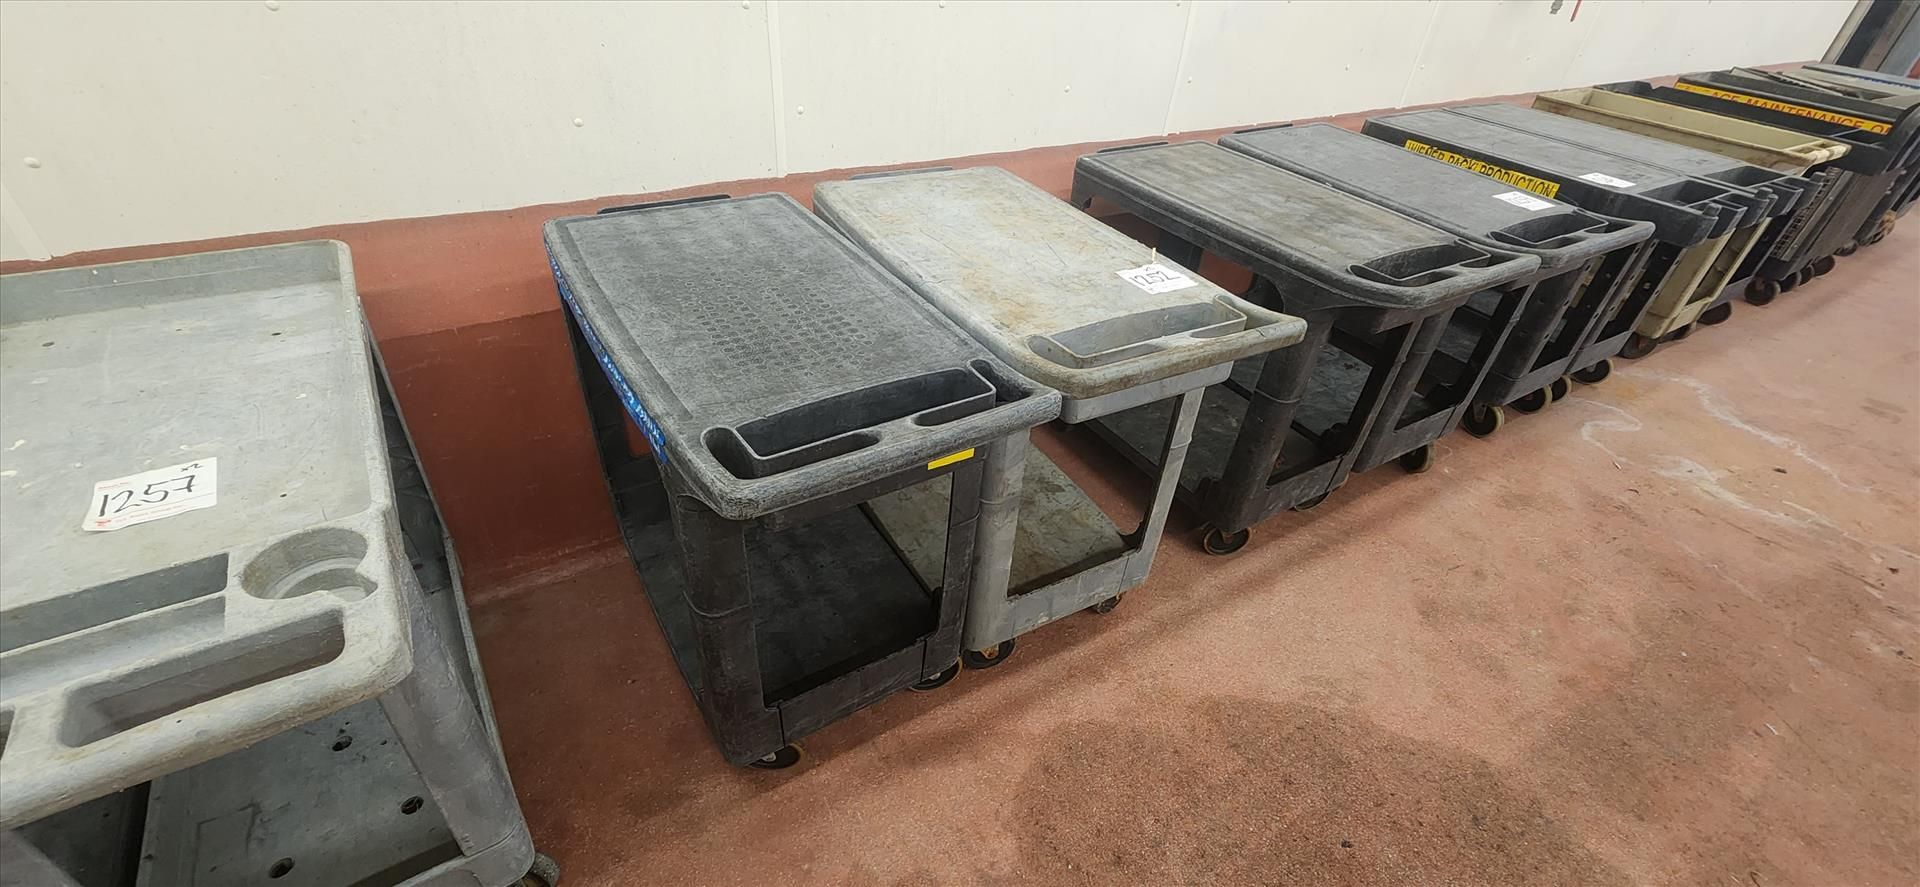 (2) shop cart, plastic, 2-tier, approx. 18 in. x 30 in. [TAG 1258 - LOC Brockley Dr.]